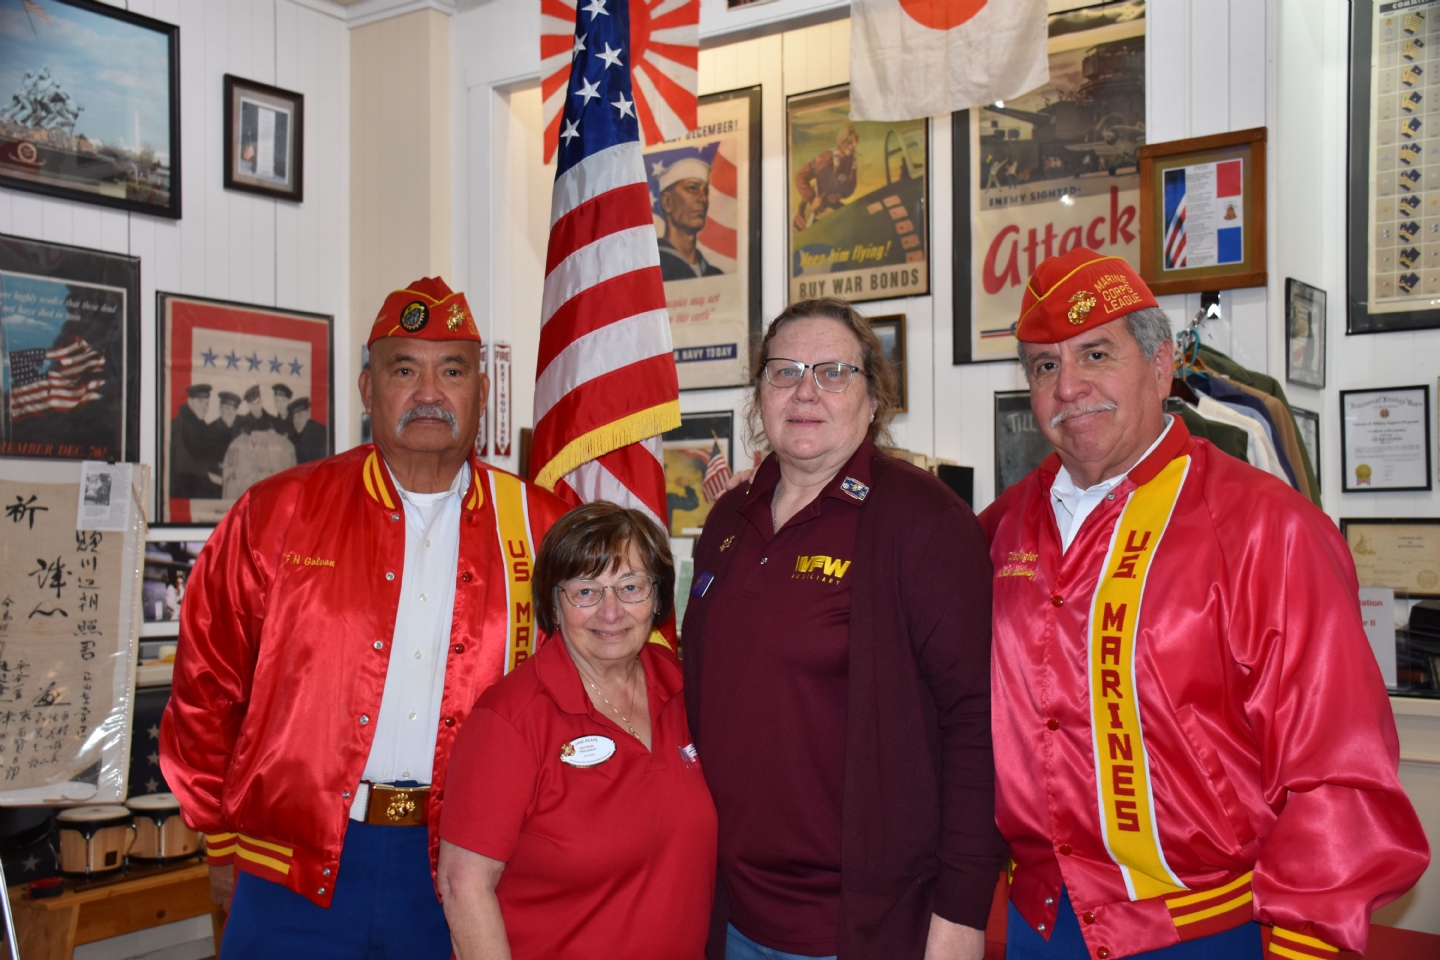 Marine Corps League members Galvan and Martinez with National President Reape and Department President Kreutz